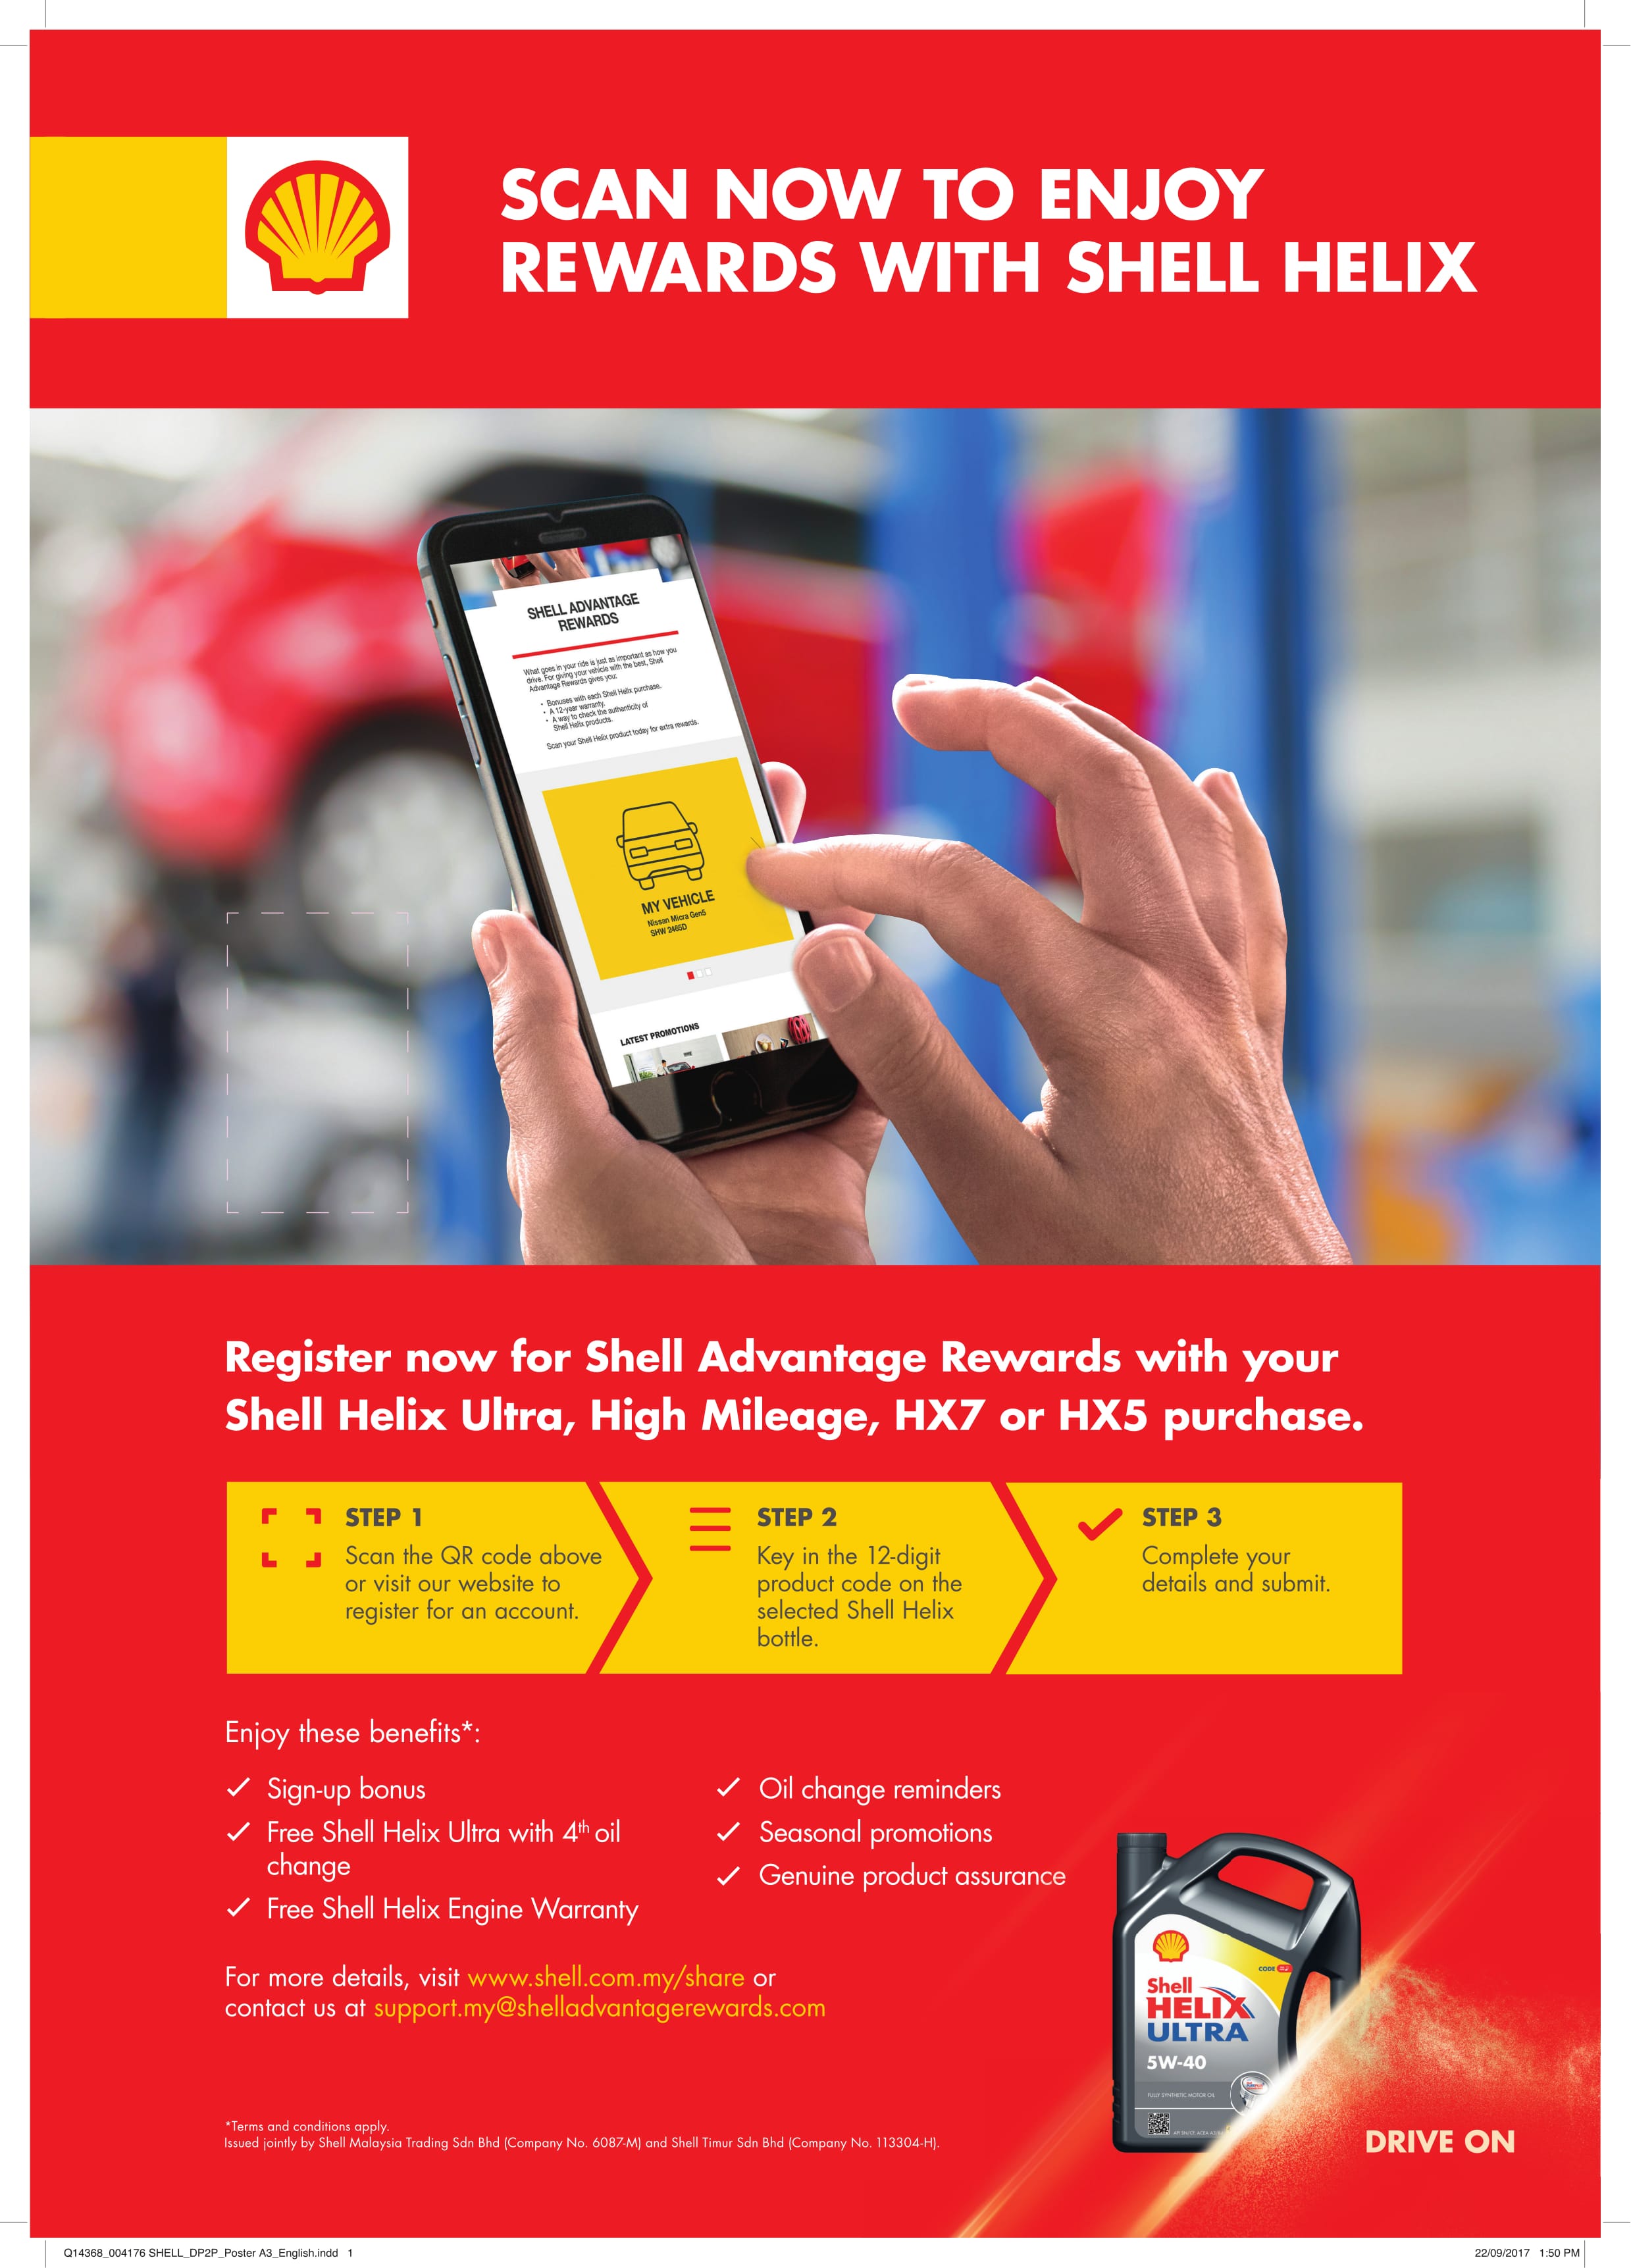 Shell Drive On Campaign